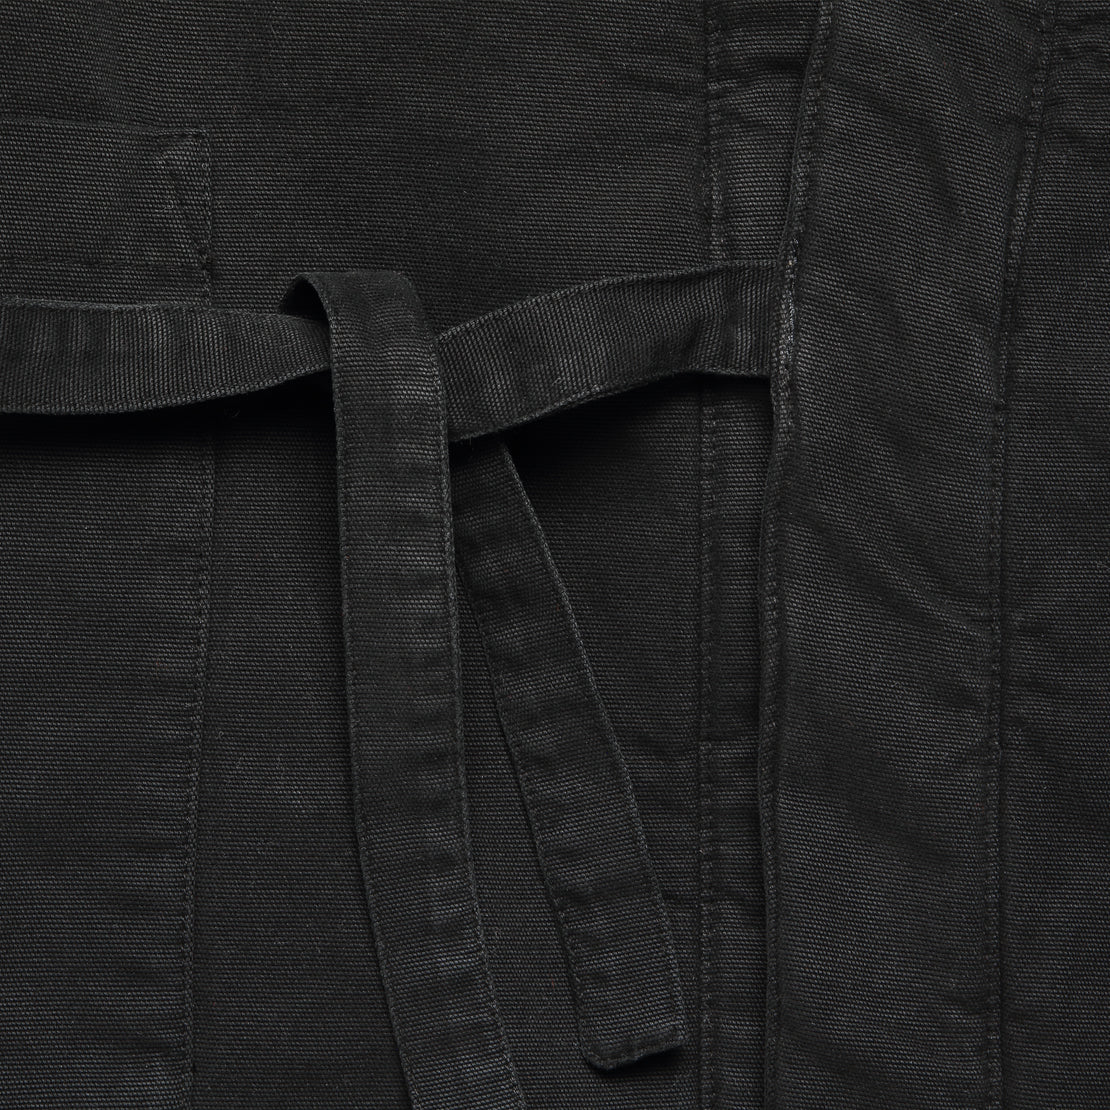 Kyoto Work Jacket - Black Quilt - Universal Works - STAG Provisions - Tops - L/S Woven - Overshirt